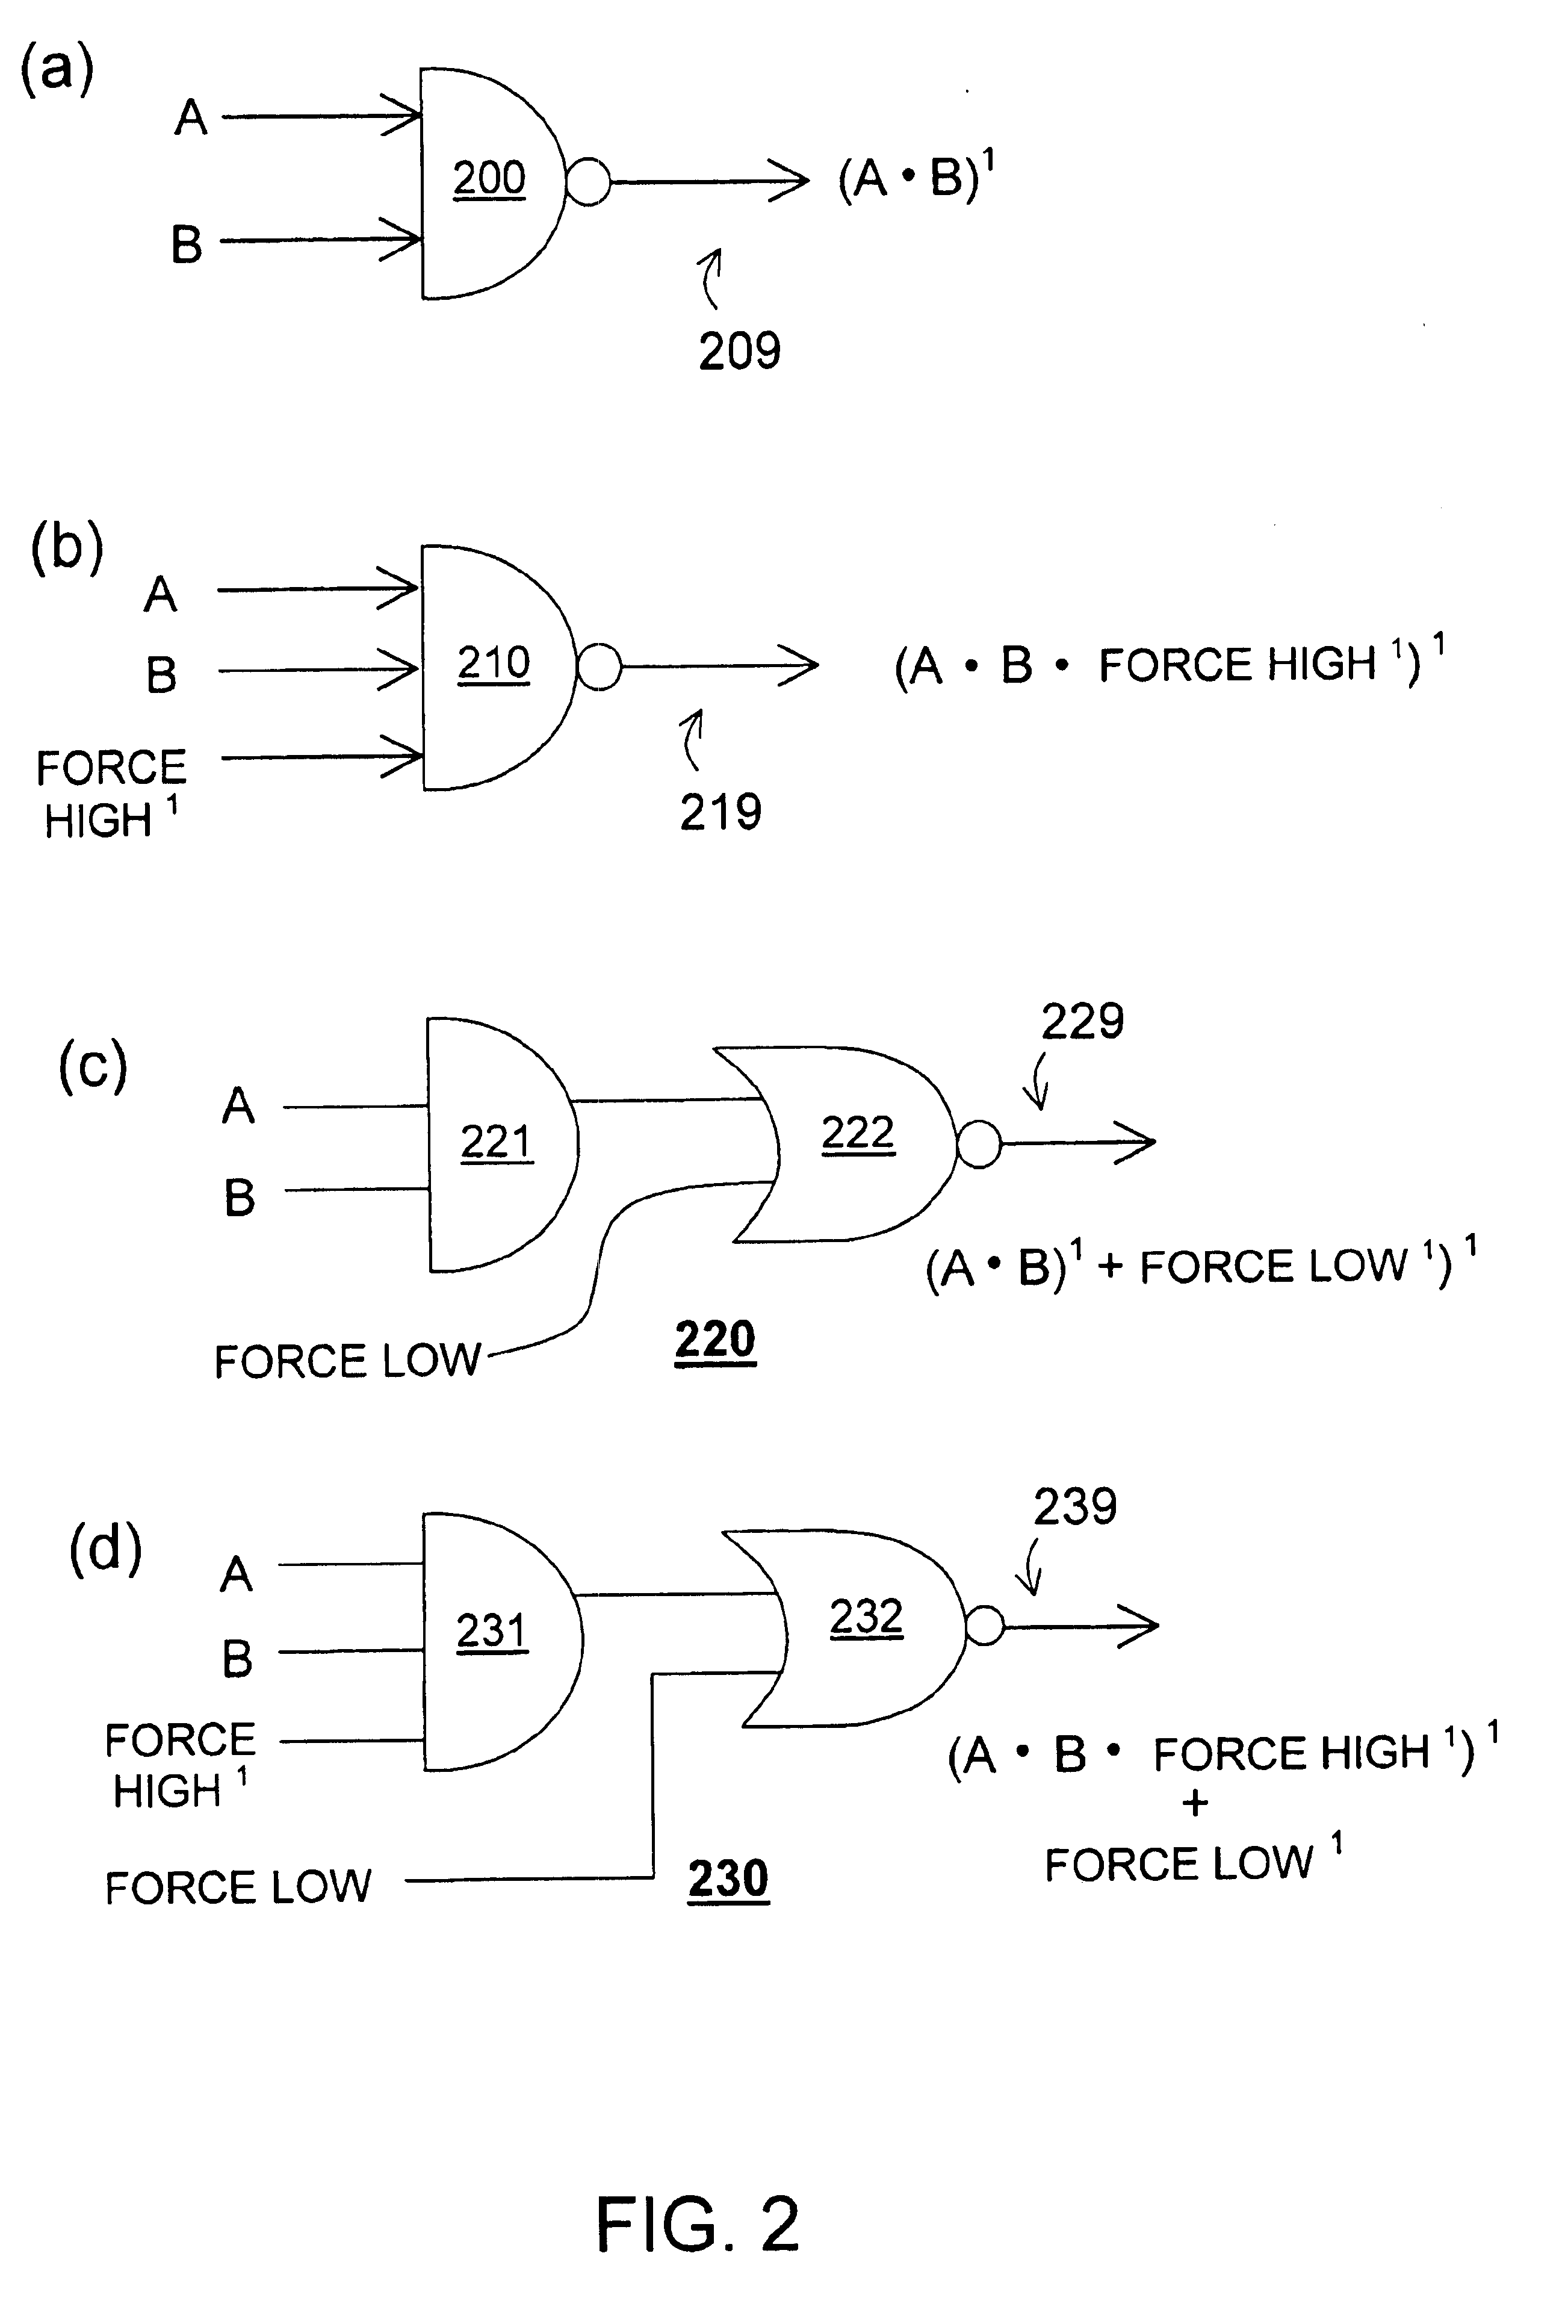 Fault coverage and simplified test pattern generation for integrated circuits